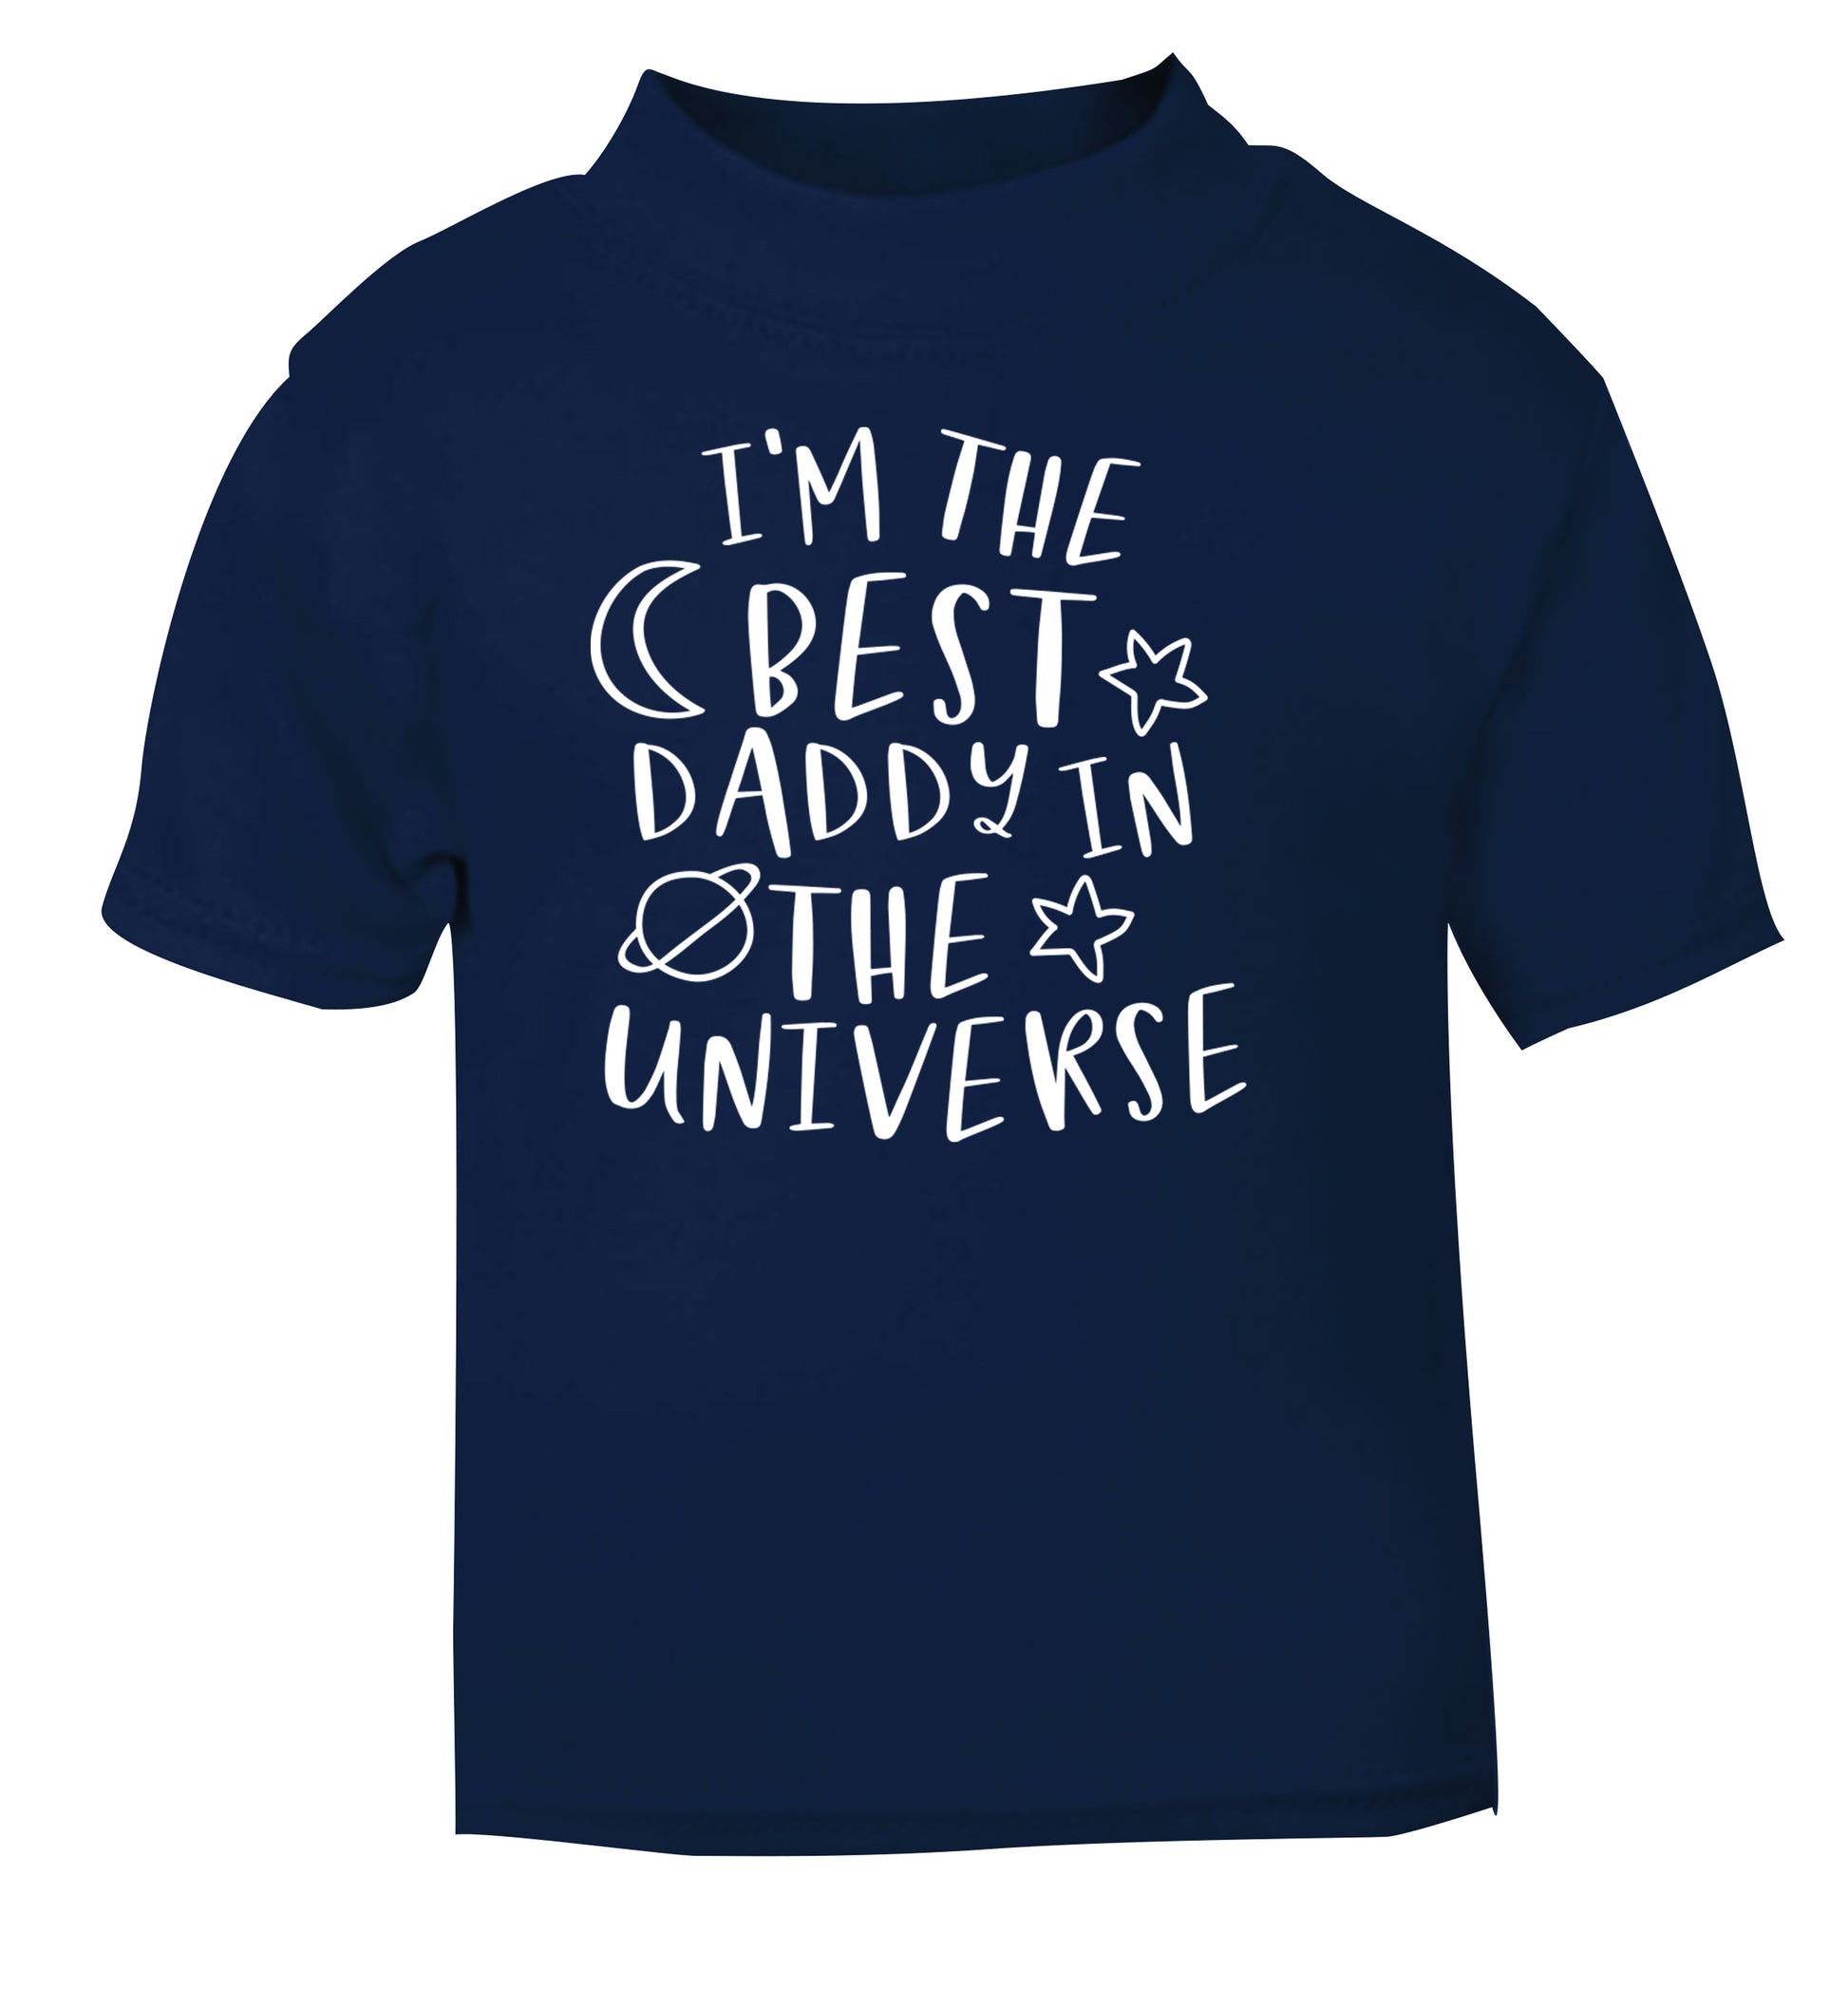 I'm the best daddy in the universe navy Baby Toddler Tshirt 2 Years